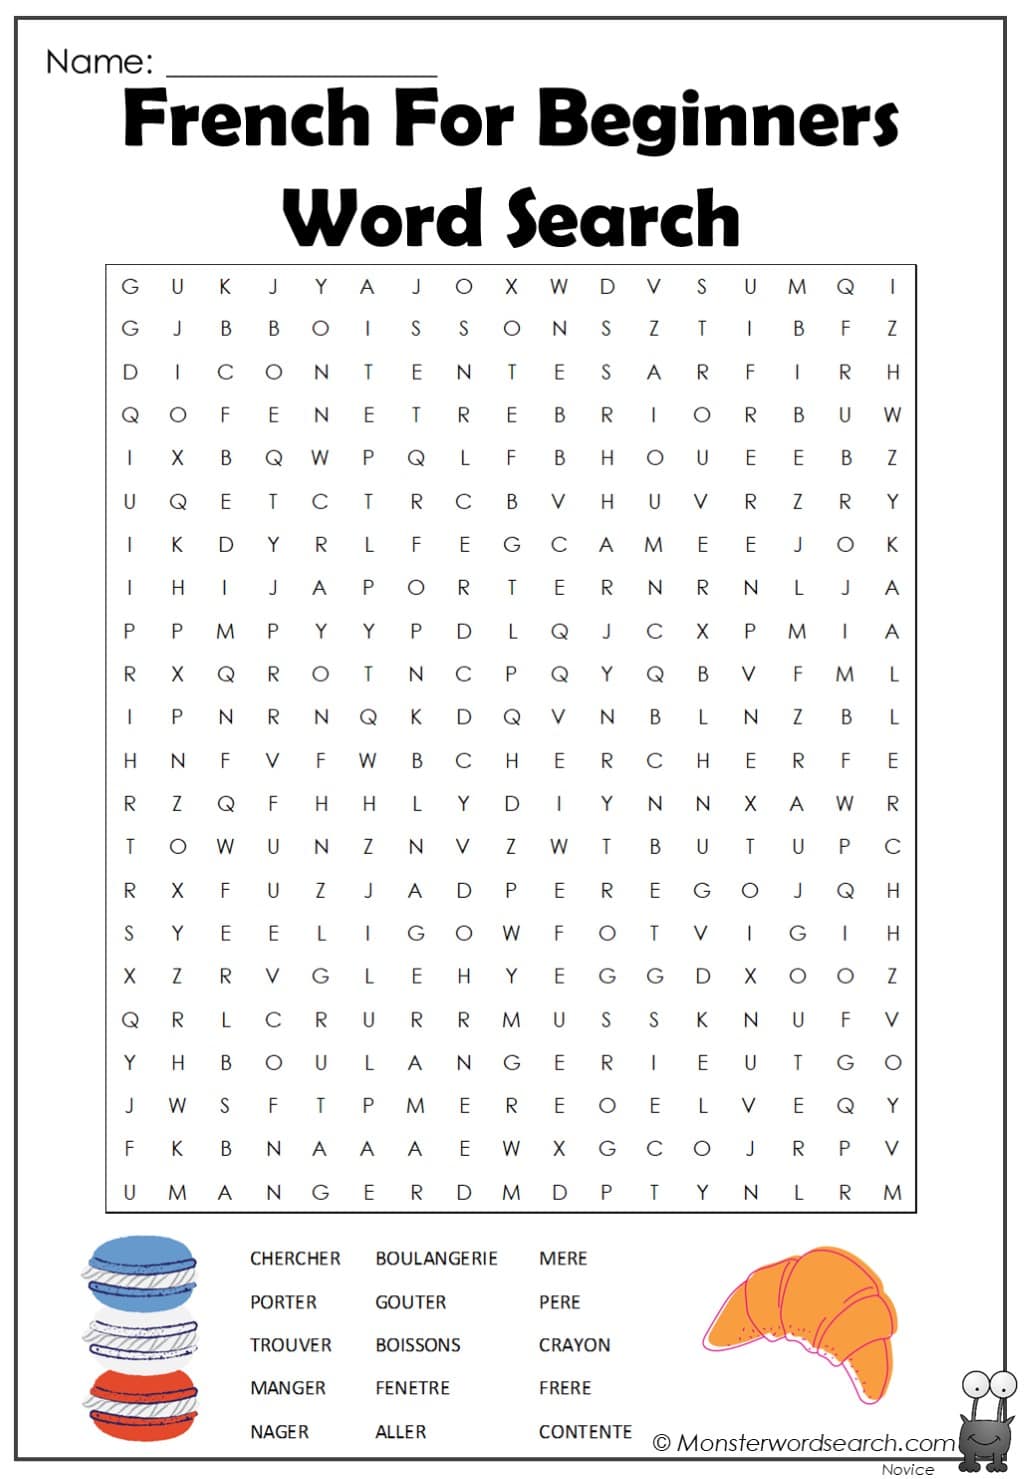 french-for-beginners-word-search-monster-word-search